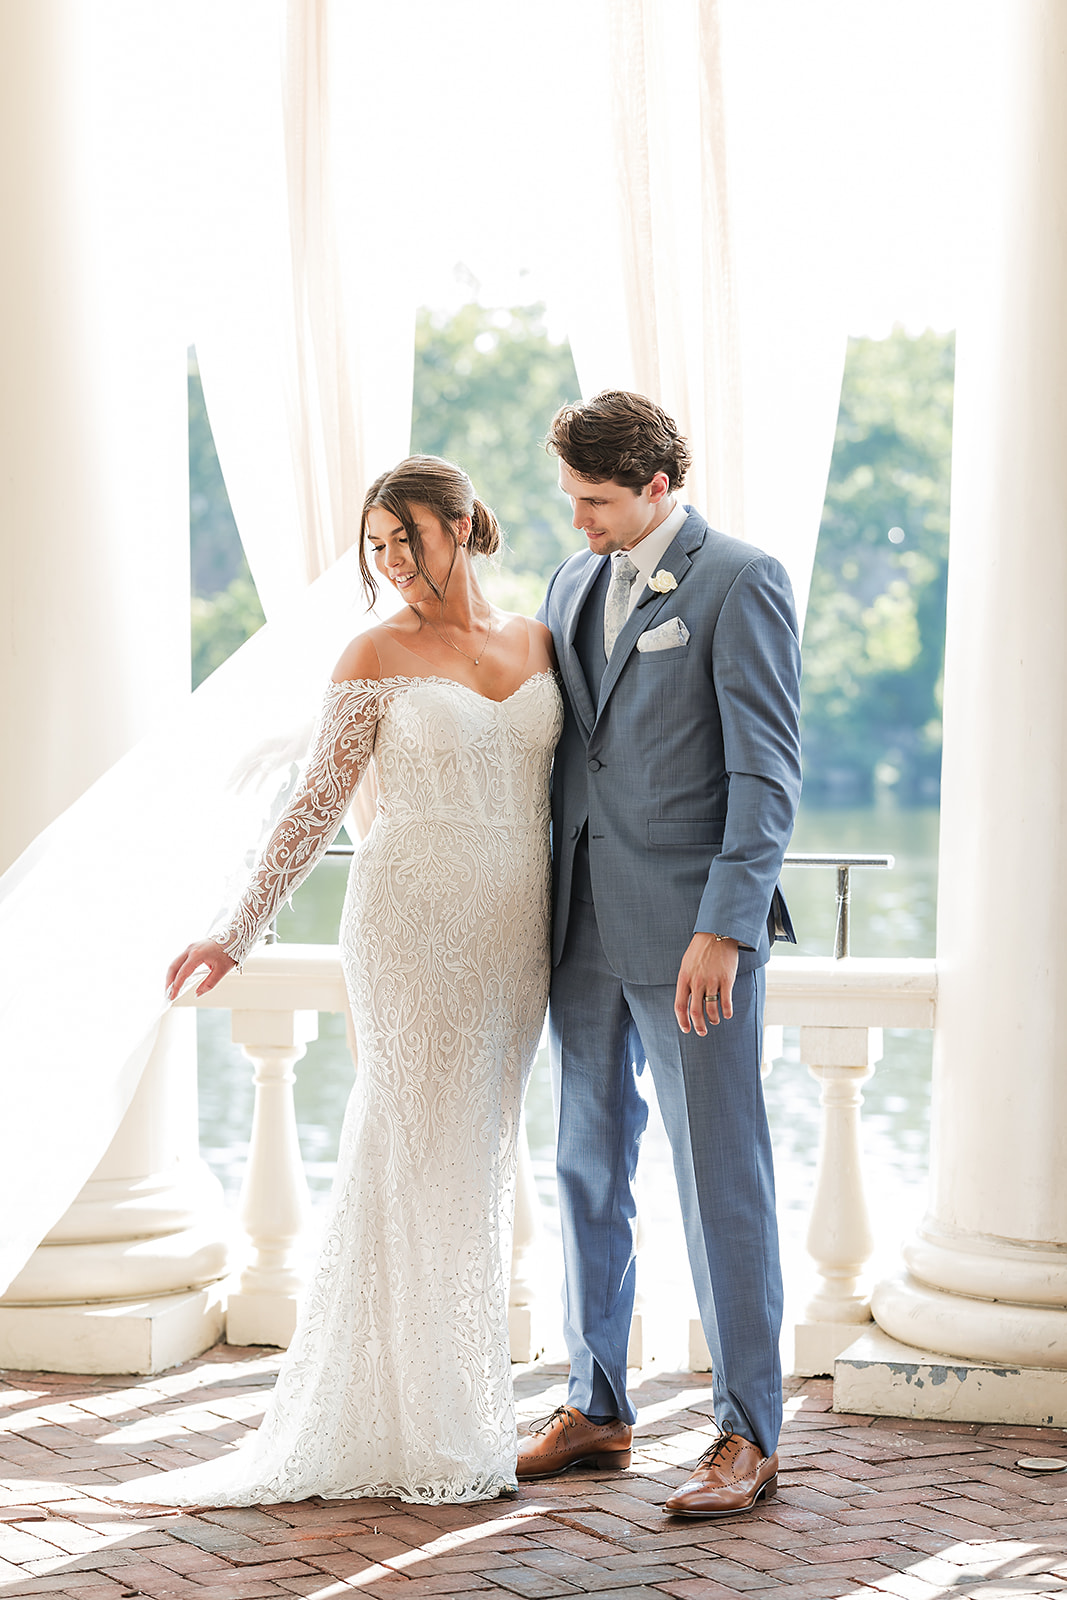 Editorial and modern wedding photography in Philadelphia